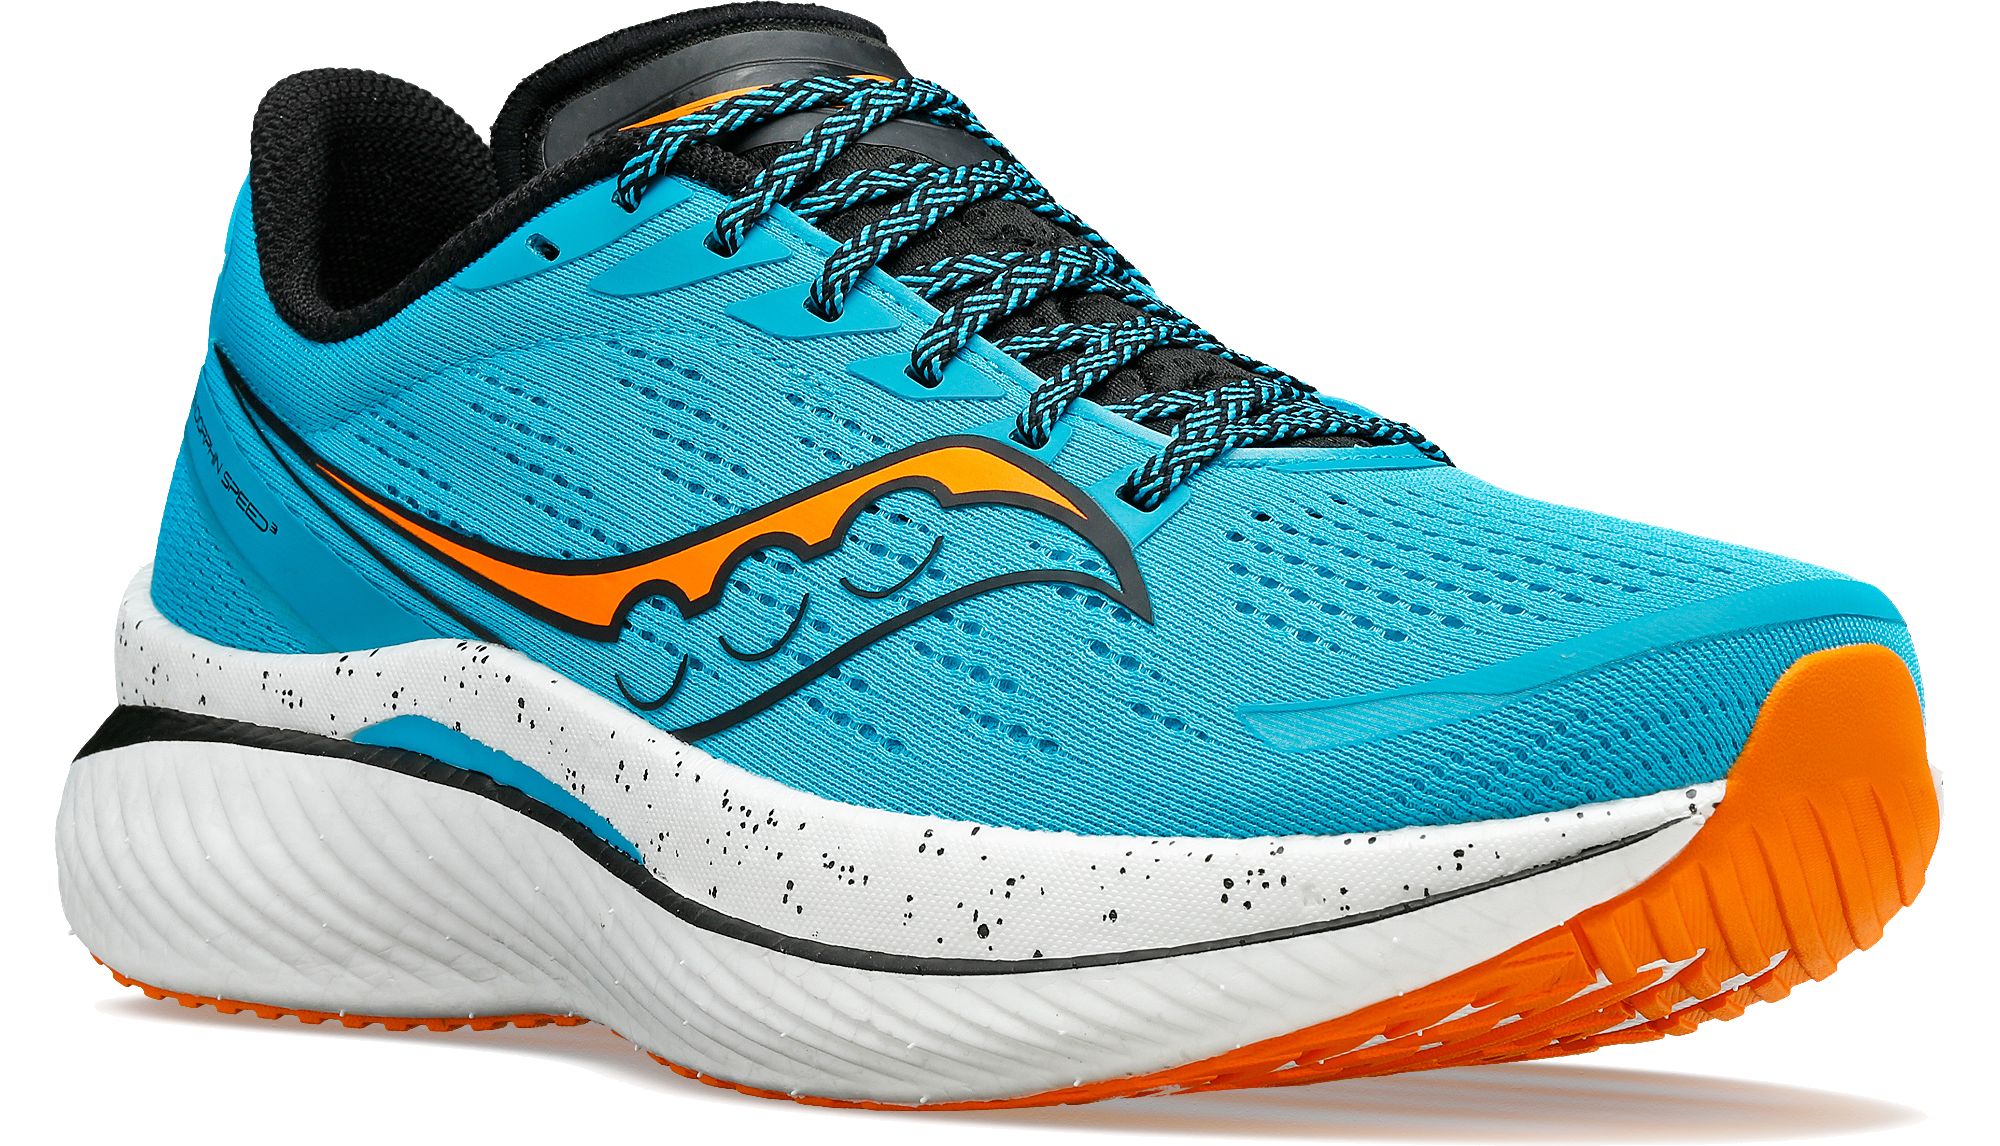 Saucony Men's & Women's Endorphin Speed 3 Running Shoes (various colors) $121.45 + Free Shipping